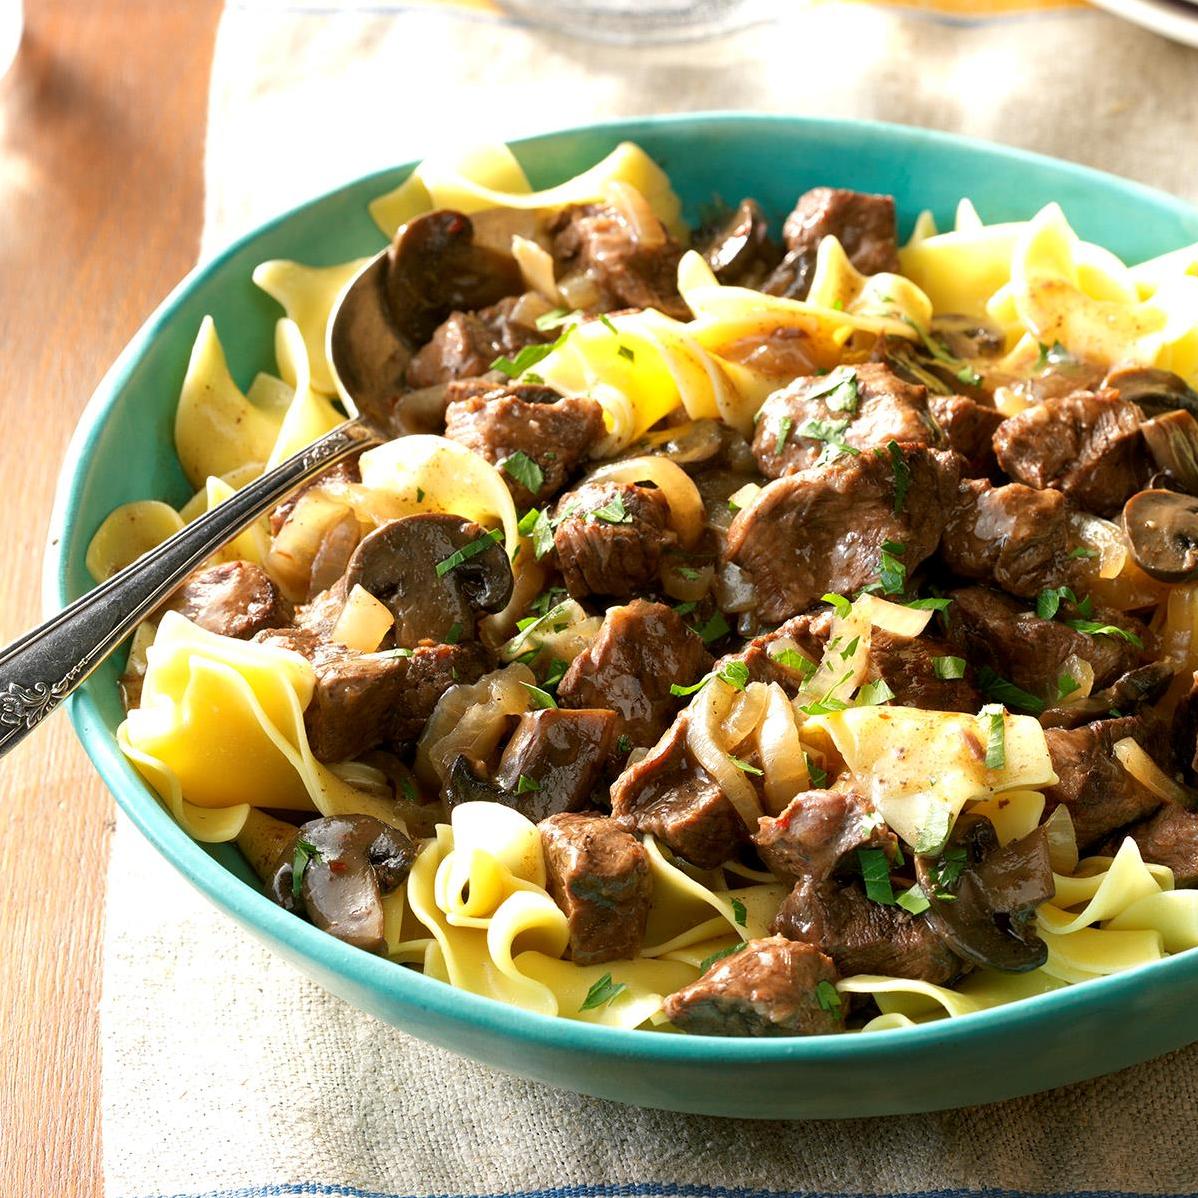  Let the crock pot do the work for you as the flavors of fennel and mushrooms infuse the beef with a depth of flavor